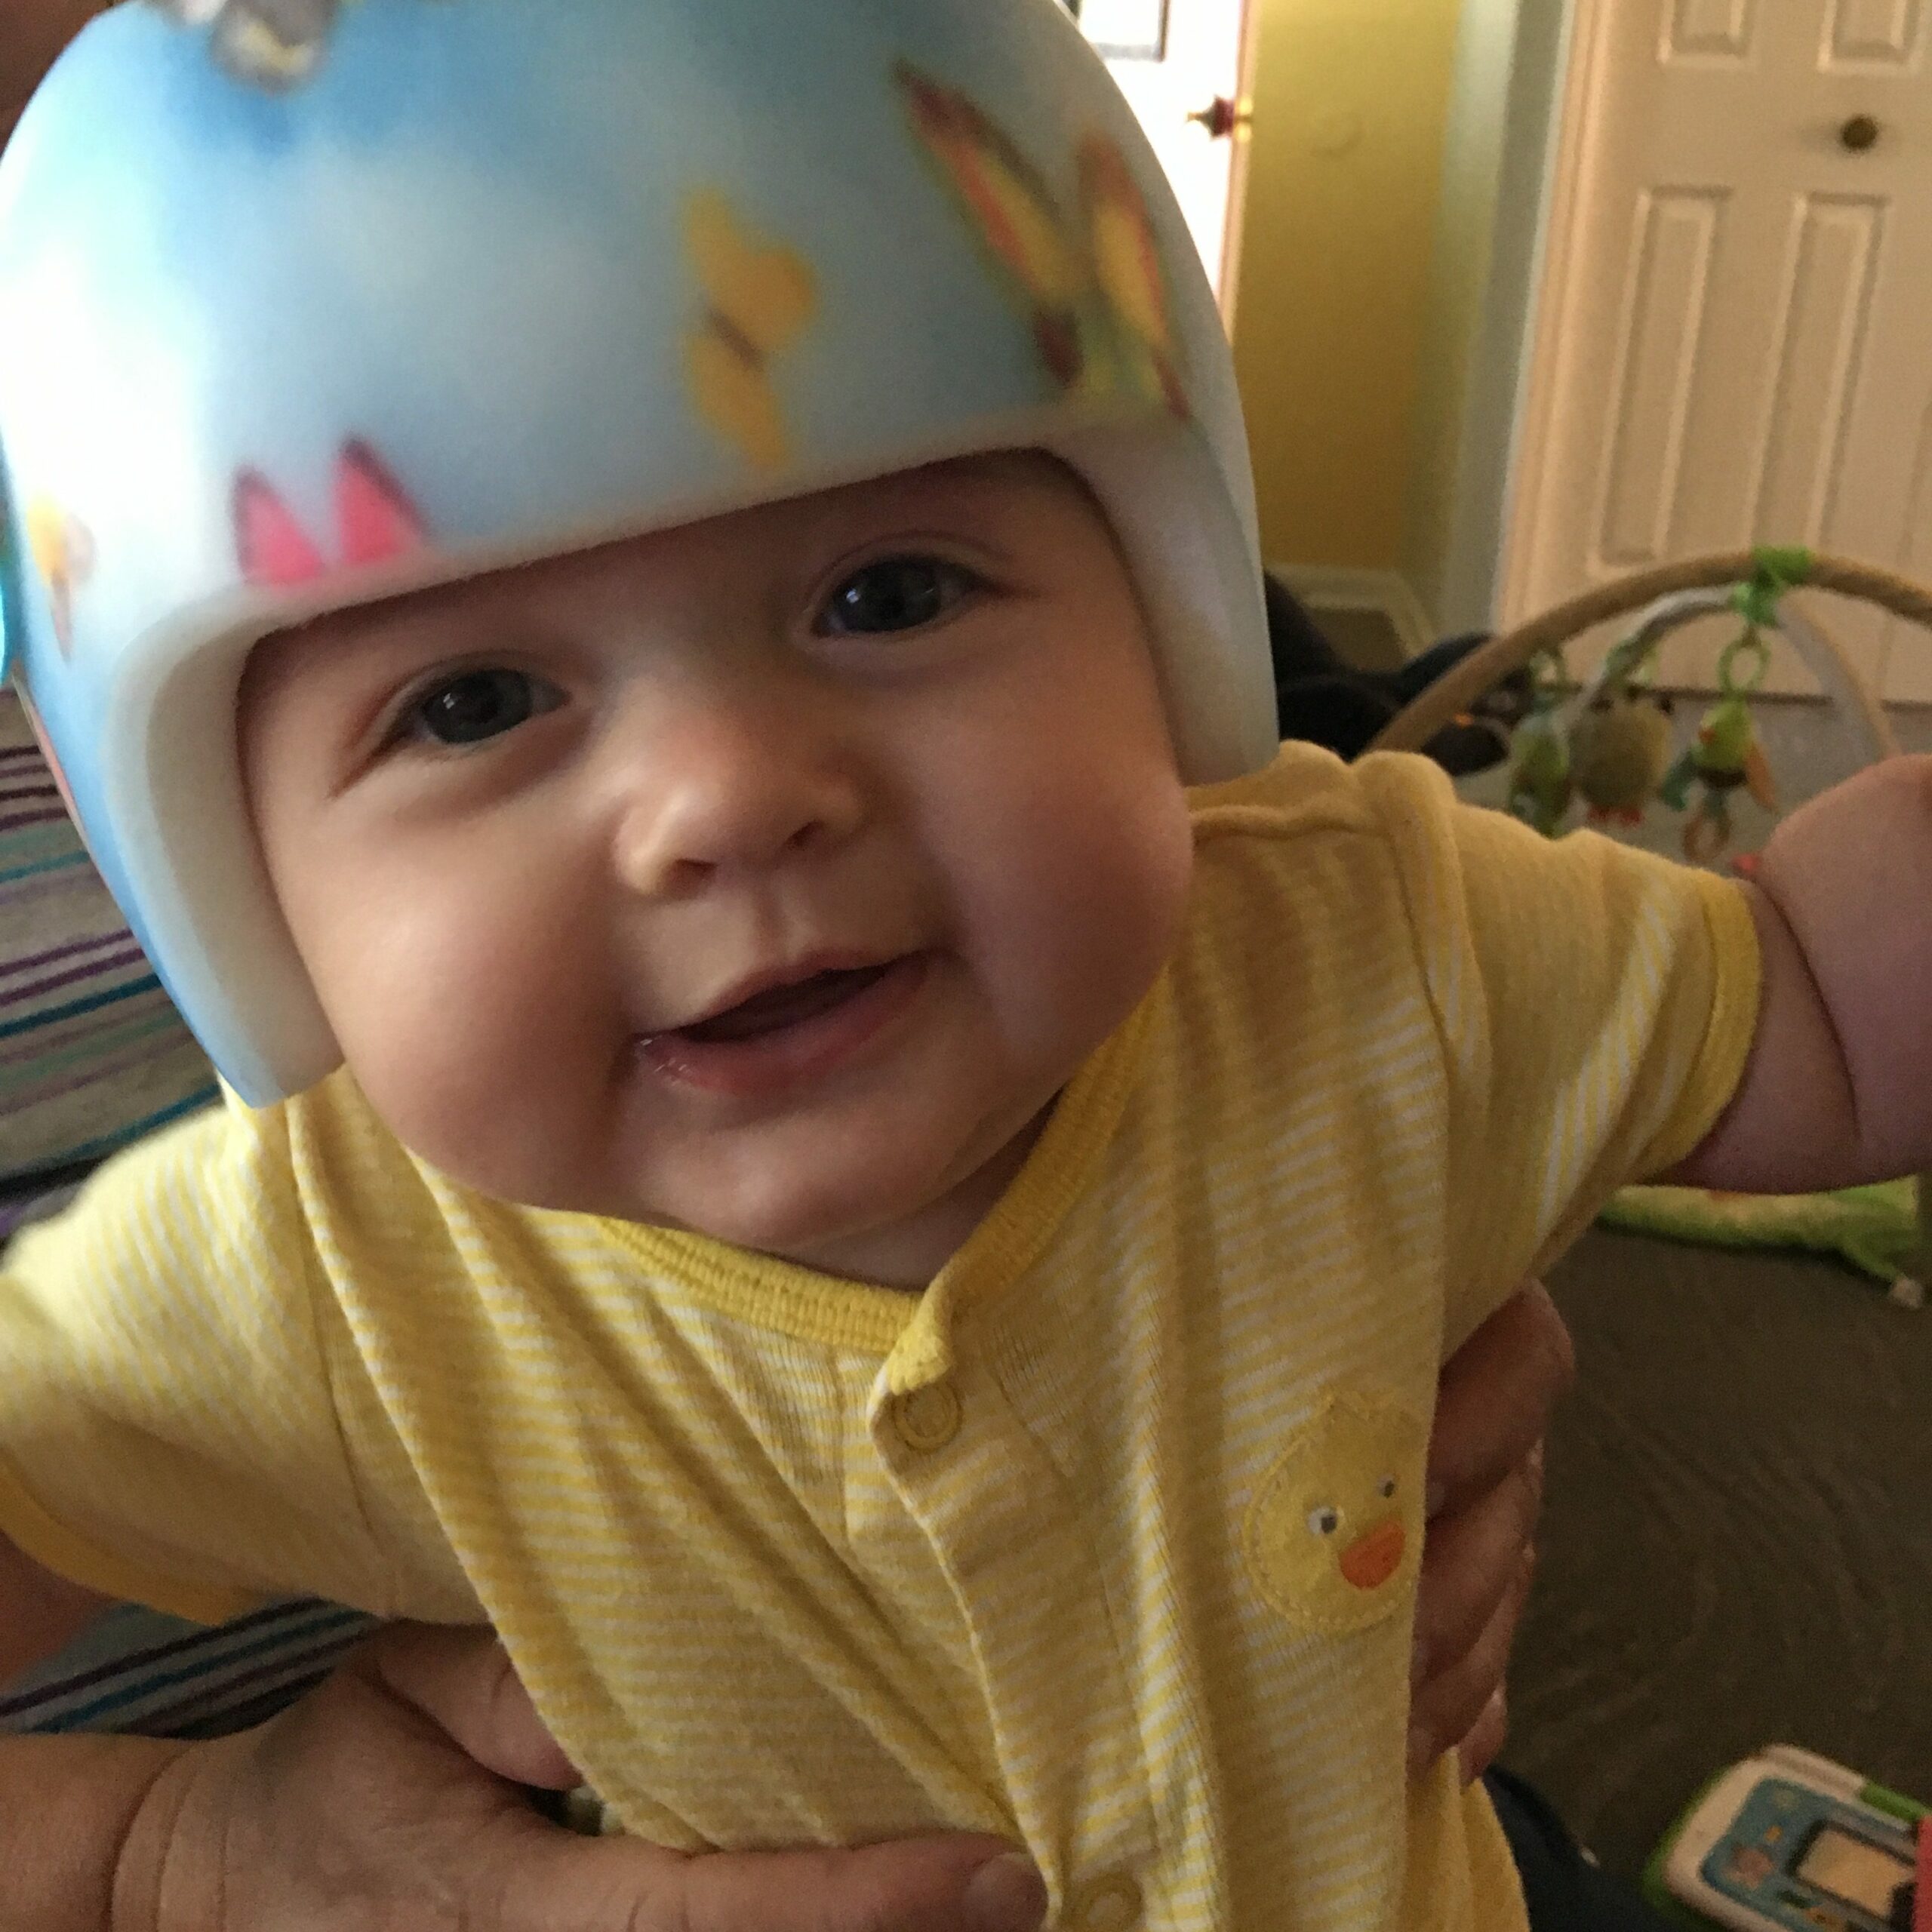 Anneliese's first day with her helmet